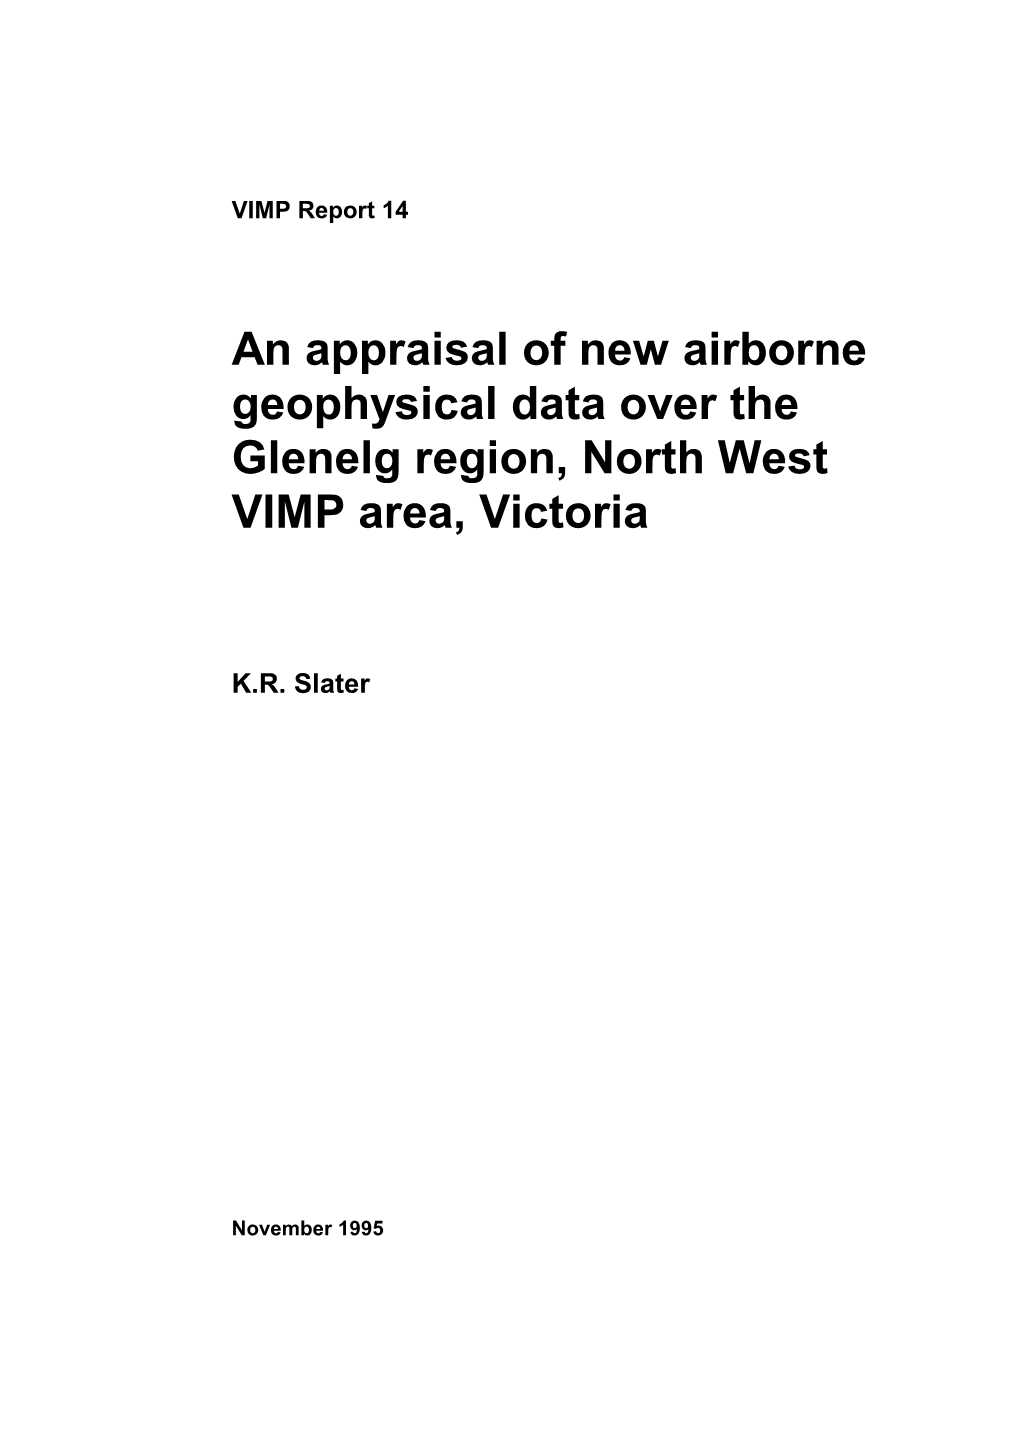 An Appraisal of New Airborne Geophysical Data Over the Glenelg Region, North West VIMP Area, Victoria